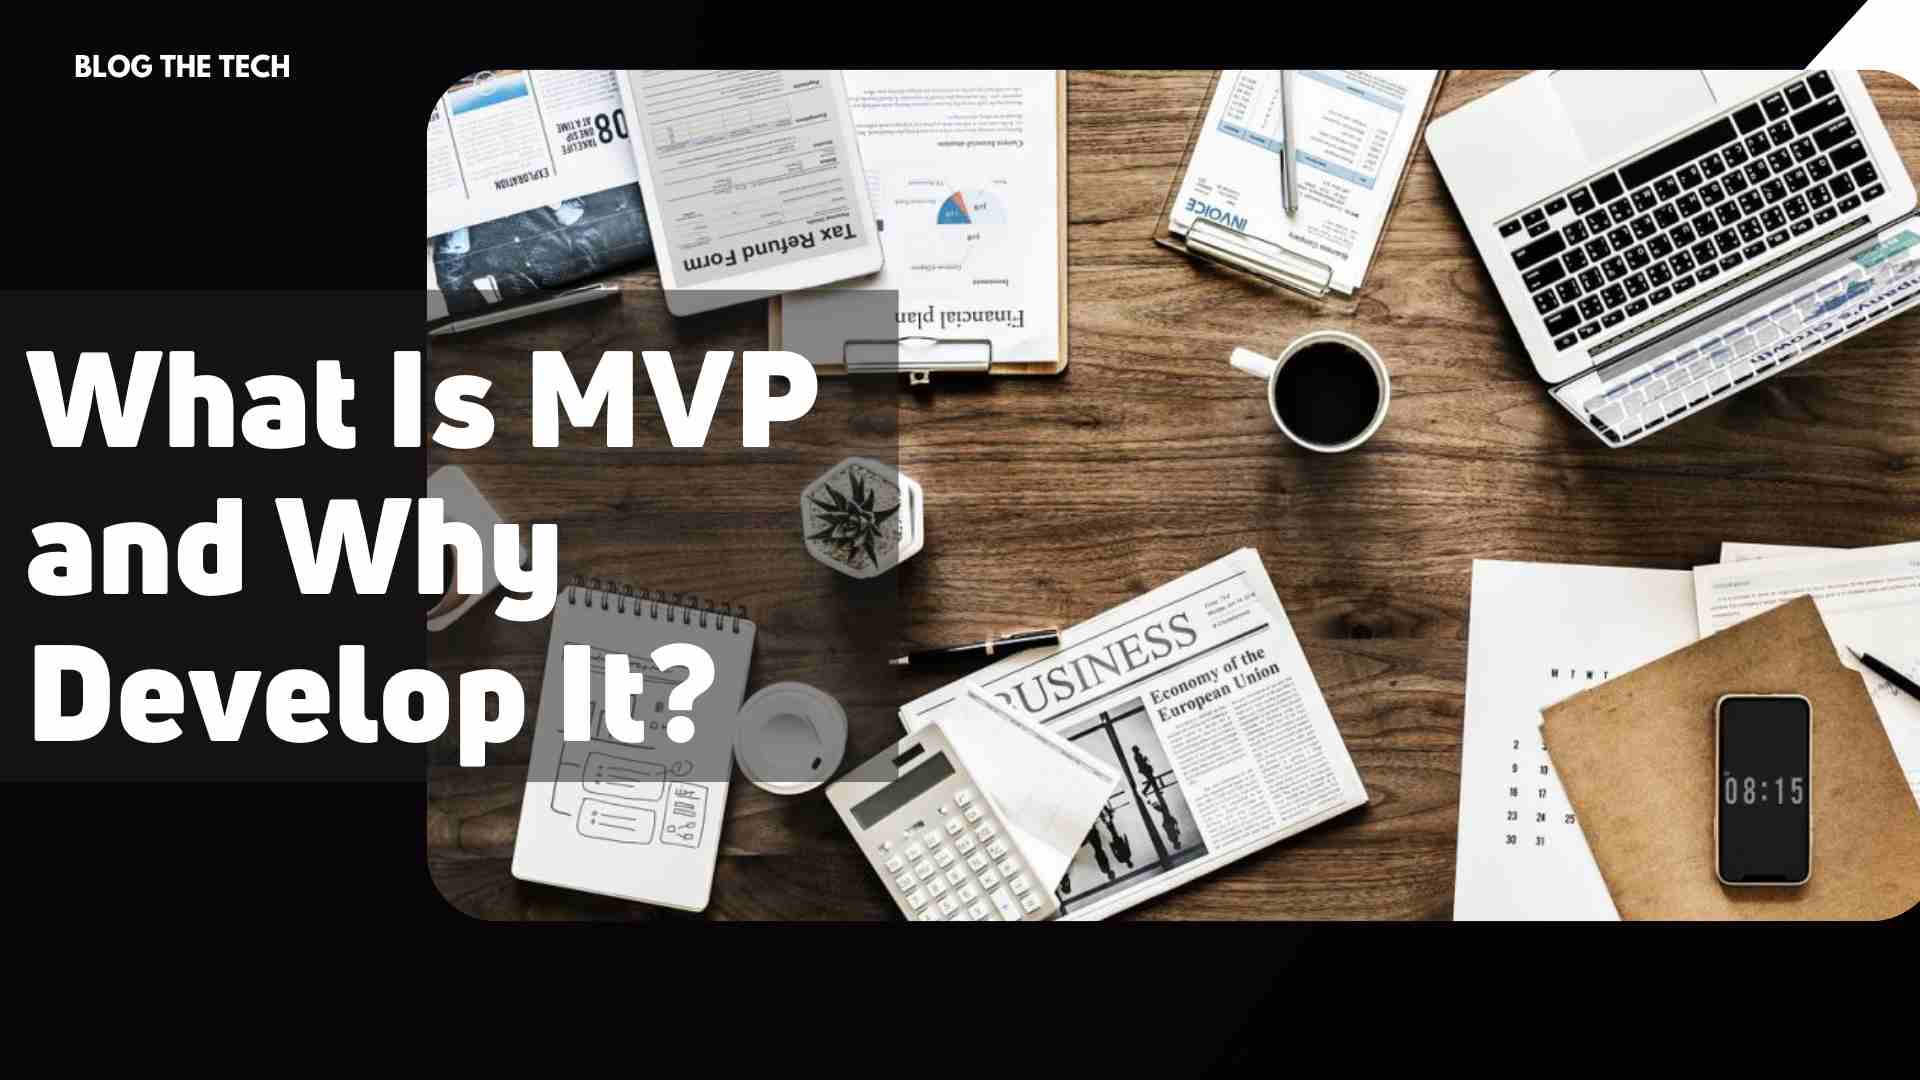 What Is MVP and Why Develop It?